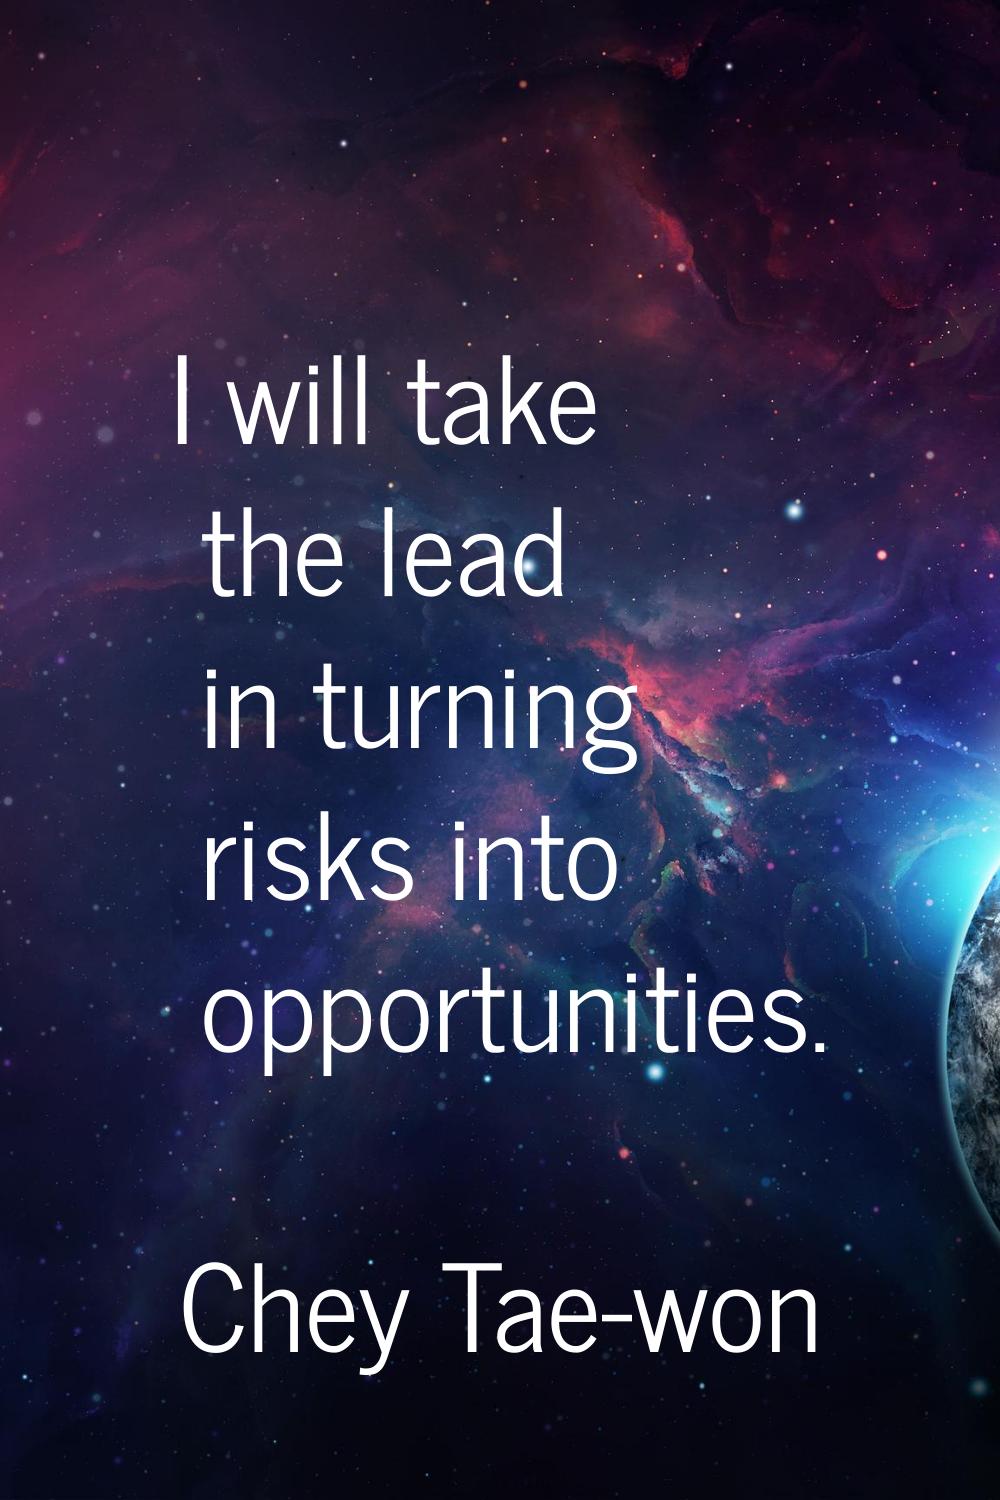 I will take the lead in turning risks into opportunities.